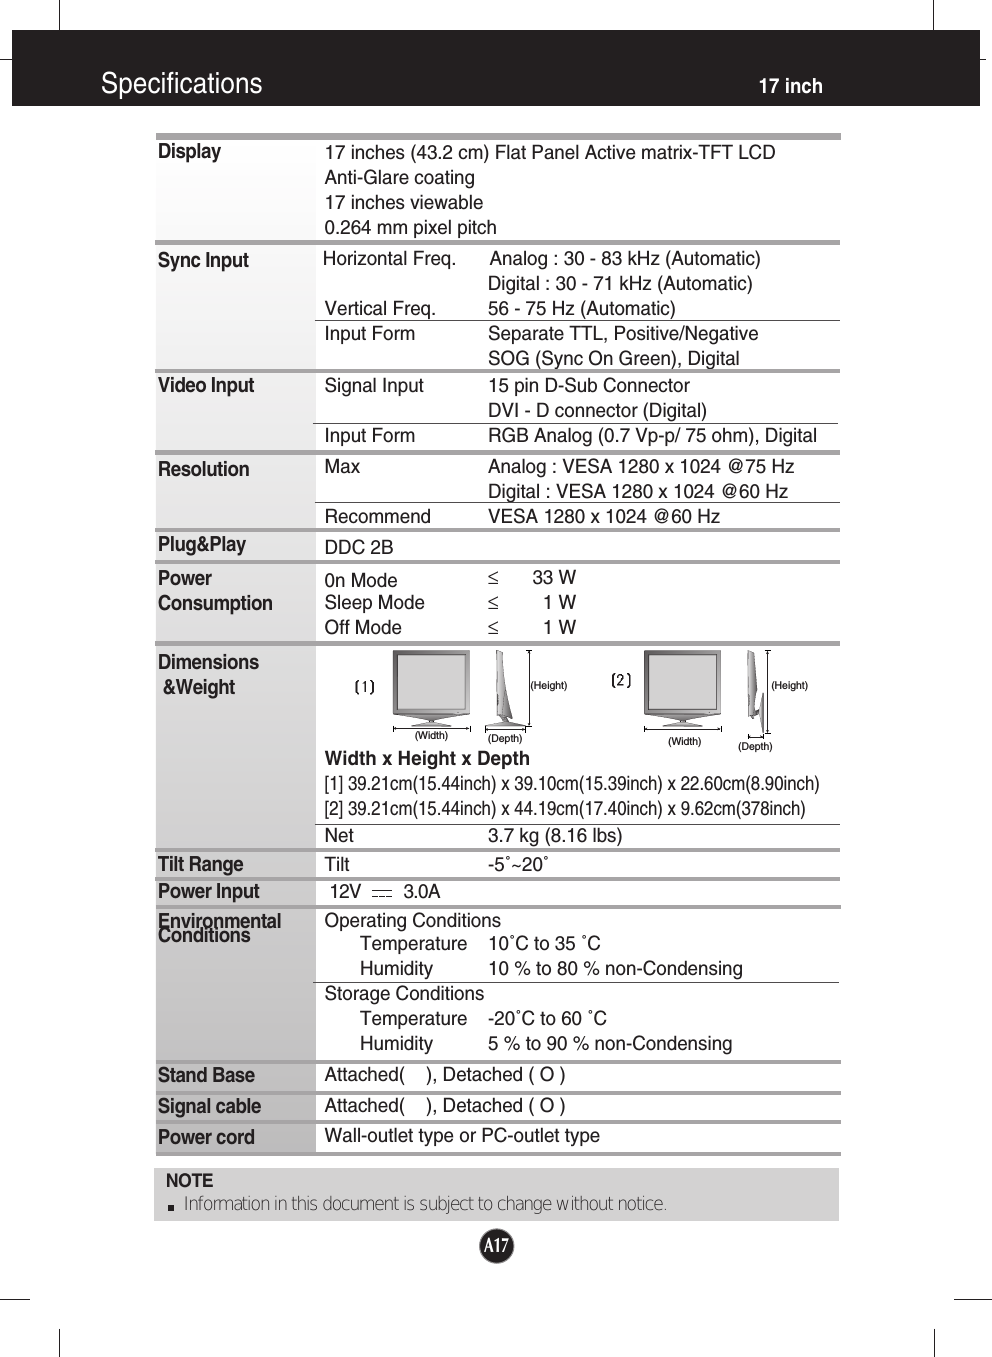 Specifications                                                                    17 inchA17DisplaySync InputVideo InputResolutionPlug&amp;PlayPowerConsumptionDimensions&amp;WeightTilt RangePower InputEnvironmentalConditionsStand Base Signal cablePower cord NOTEInformation in this document is subject to change without notice.17 inches (43.2 cm) Flat Panel Active matrix-TFT LCD Anti-Glare coating17 inches viewable0.264 mm pixel pitchHorizontal Freq.  Analog : 30 - 83 kHz (Automatic)Digital : 30 - 71 kHz (Automatic)Vertical Freq. 56 - 75 Hz (Automatic)Input Form Separate TTL, Positive/NegativeSOG (Sync On Green), DigitalSignal Input 15 pin D-Sub ConnectorDVI - D connector (Digital)Input Form RGB Analog (0.7 Vp-p/ 75 ohm), DigitalMax Analog : VESA 1280 x 1024 @75 HzDigital : VESA 1280 x 1024 @60 HzRecommend VESA 1280 x 1024 @60 HzDDC 2B0n Mode ≤33 WSleep Mode ≤1 WOff Mode ≤1 WWidth x Height x Depth[1] 39.21cm(15.44inch) x 39.10cm(15.39inch) x 22.60cm(8.90inch)[2] 39.21cm(15.44inch) x 44.19cm(17.40inch) x 9.62cm(378inch)Net 3.7 kg (8.16 lbs)Tilt -5˚~20˚12V         3.0AOperating ConditionsTemperature 10˚C to 35 ˚CHumidity 10 % to 80 % non-CondensingStorage ConditionsTemperature -20˚C to 60 ˚CHumidity 5 % to 90 % non-CondensingAttached(    ), Detached ( O )Attached(    ), Detached ( O )Wall-outlet type or PC-outlet typeSOURCESOURCEMENUMENUSET/AUTOSET/AUTOEngineEngine(Width) (Depth)(Height)SOURCESOURCEMENUMENUSET/AUTOSET/AUTOEngineEngine(Width) (Depth)(Height)